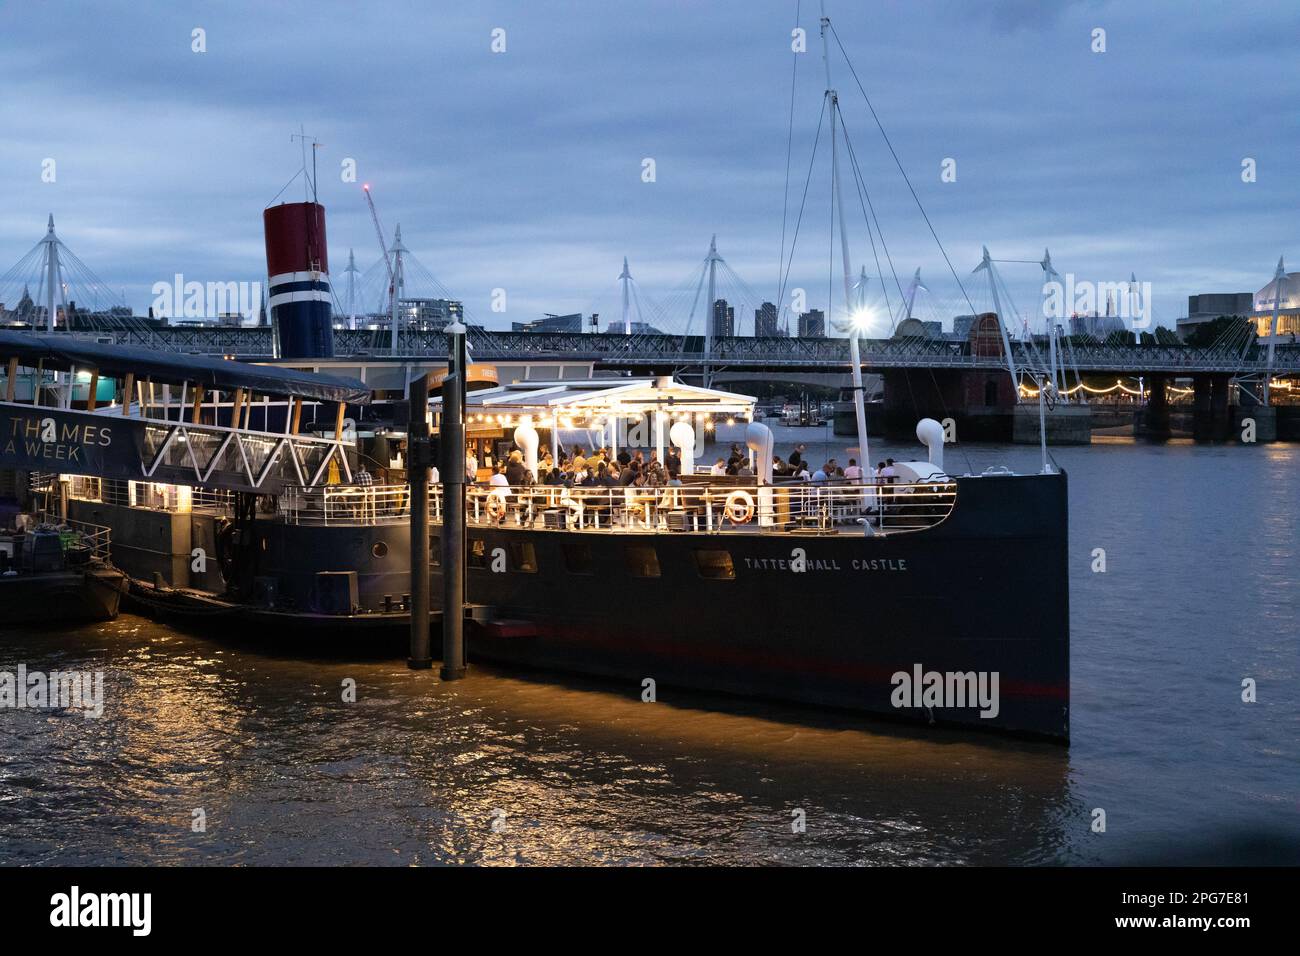 The Tattershall Castle boat is moored on the side of the river Thames at Victoria Embankment and is entertaining crowds of people in the evening. Stock Photo